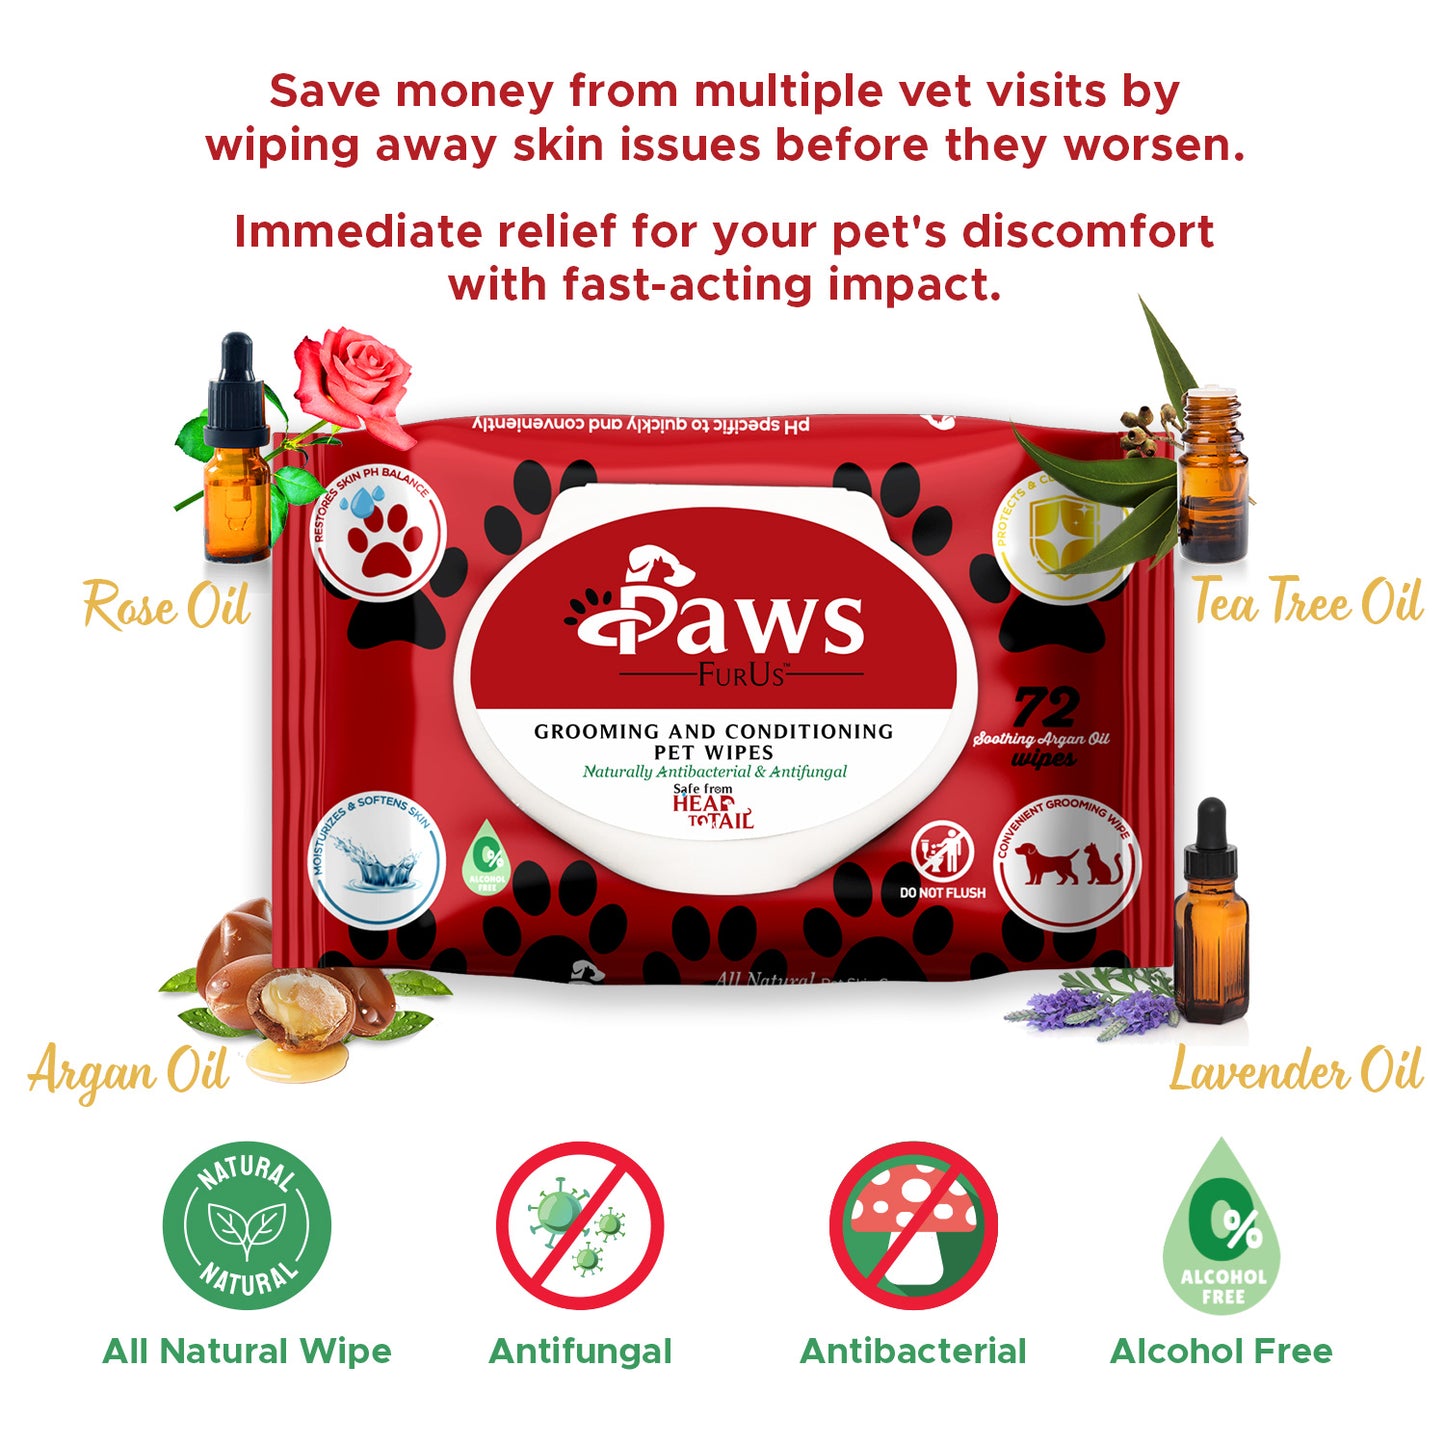 Save money from multiple vet visits by wiping away skin issues before they worsen. Immediate relief for your pet's discomfort with fast-acting impact. It is an all-natural wipe that is both antifungal and antibacterial. It also is alcohol free.